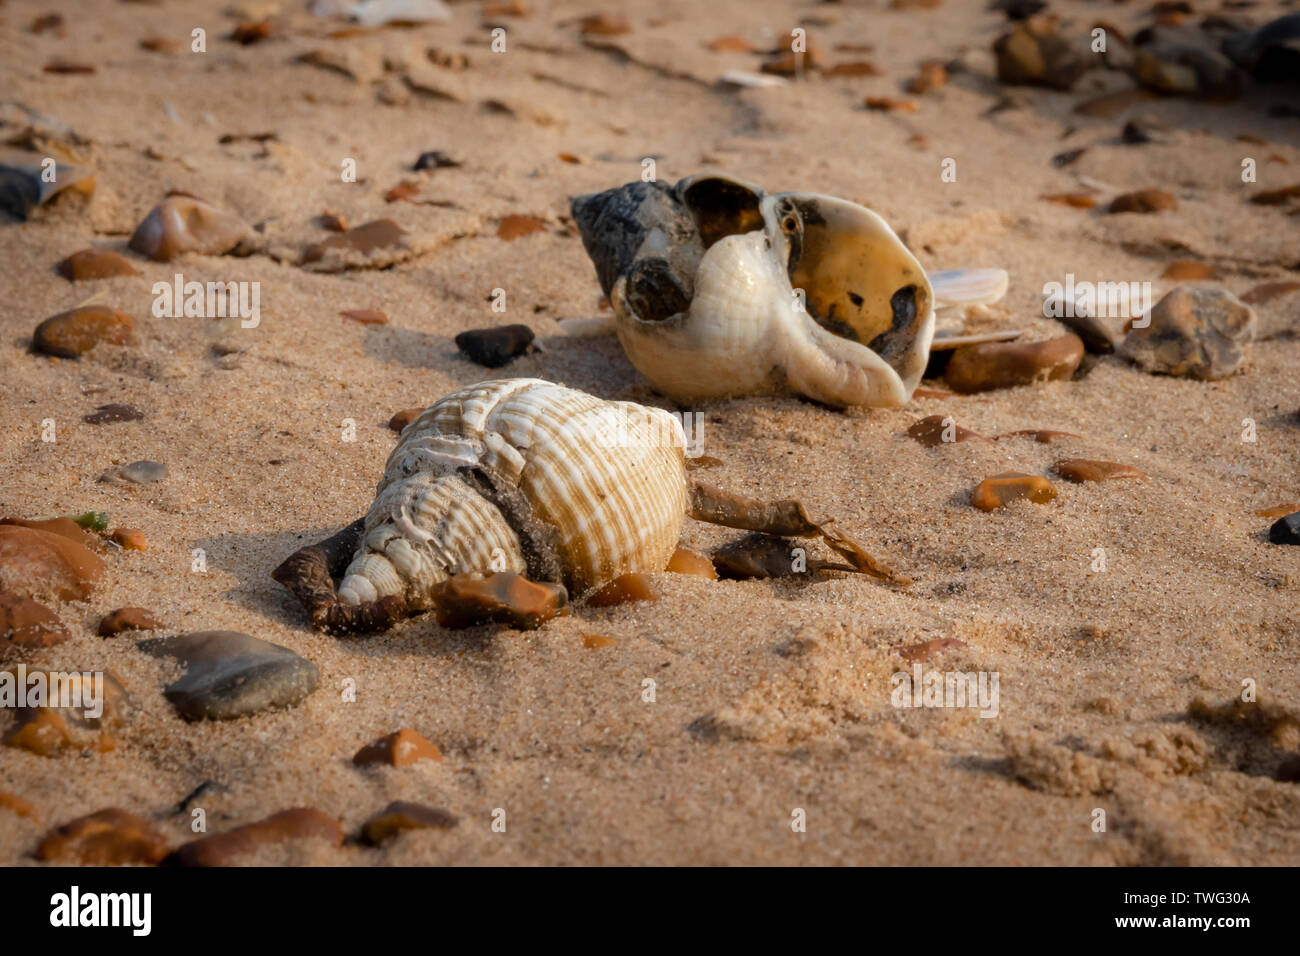 Dog whelk sea shells on a sandy beach surrounded by worn rounded pebbles a common sight on UK beaches Stock Photo